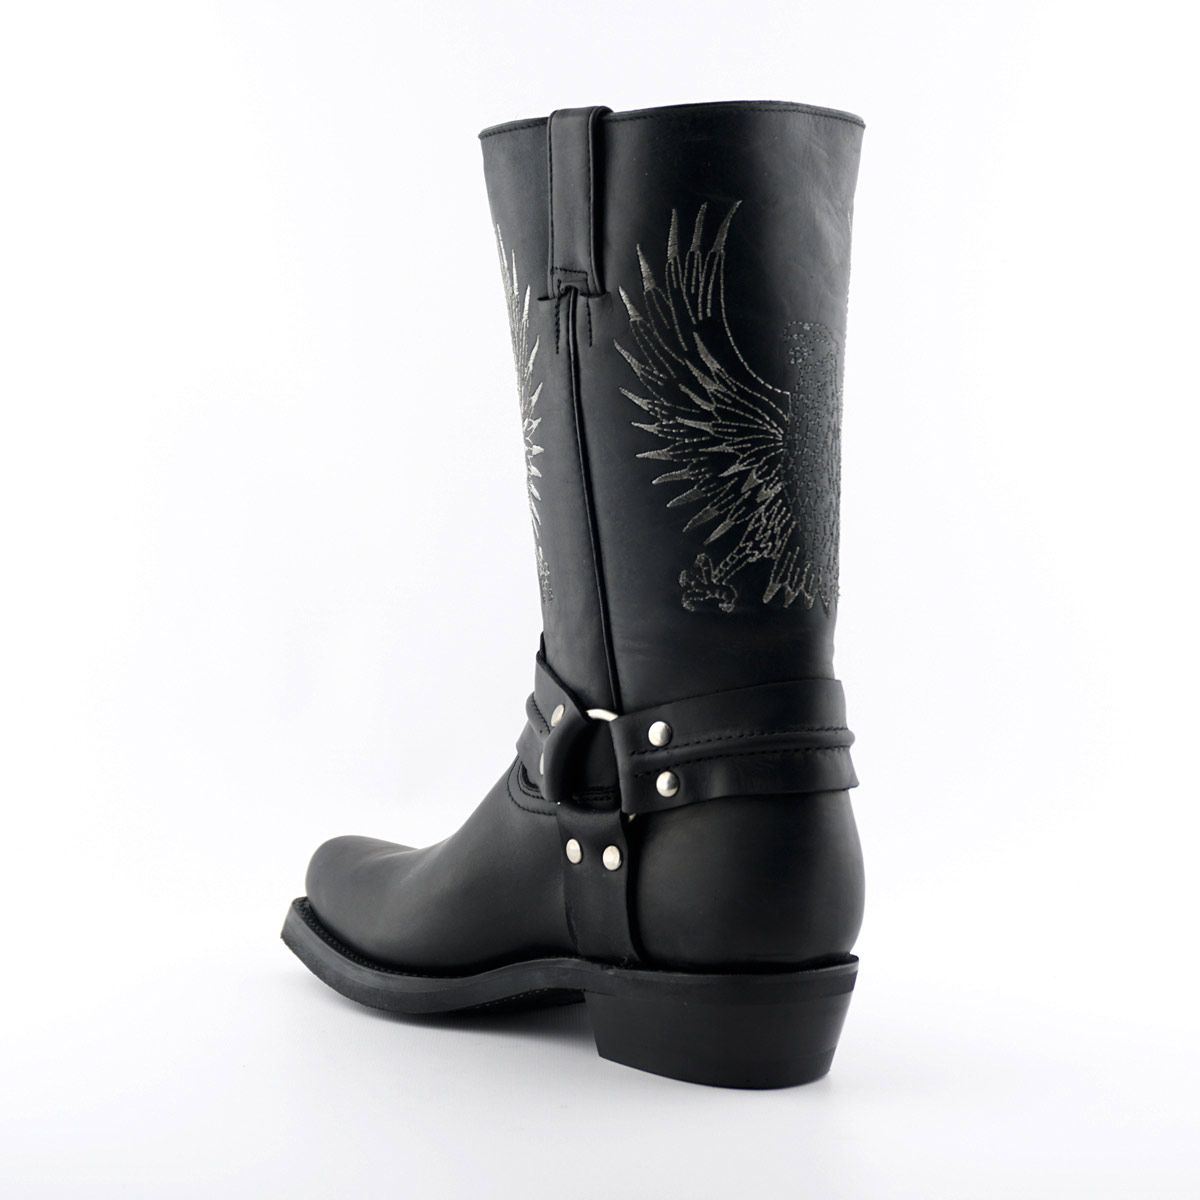 Grinders Mens Black Leather Cowboy Boots-Bald Eagle - Upperclass Fashions 